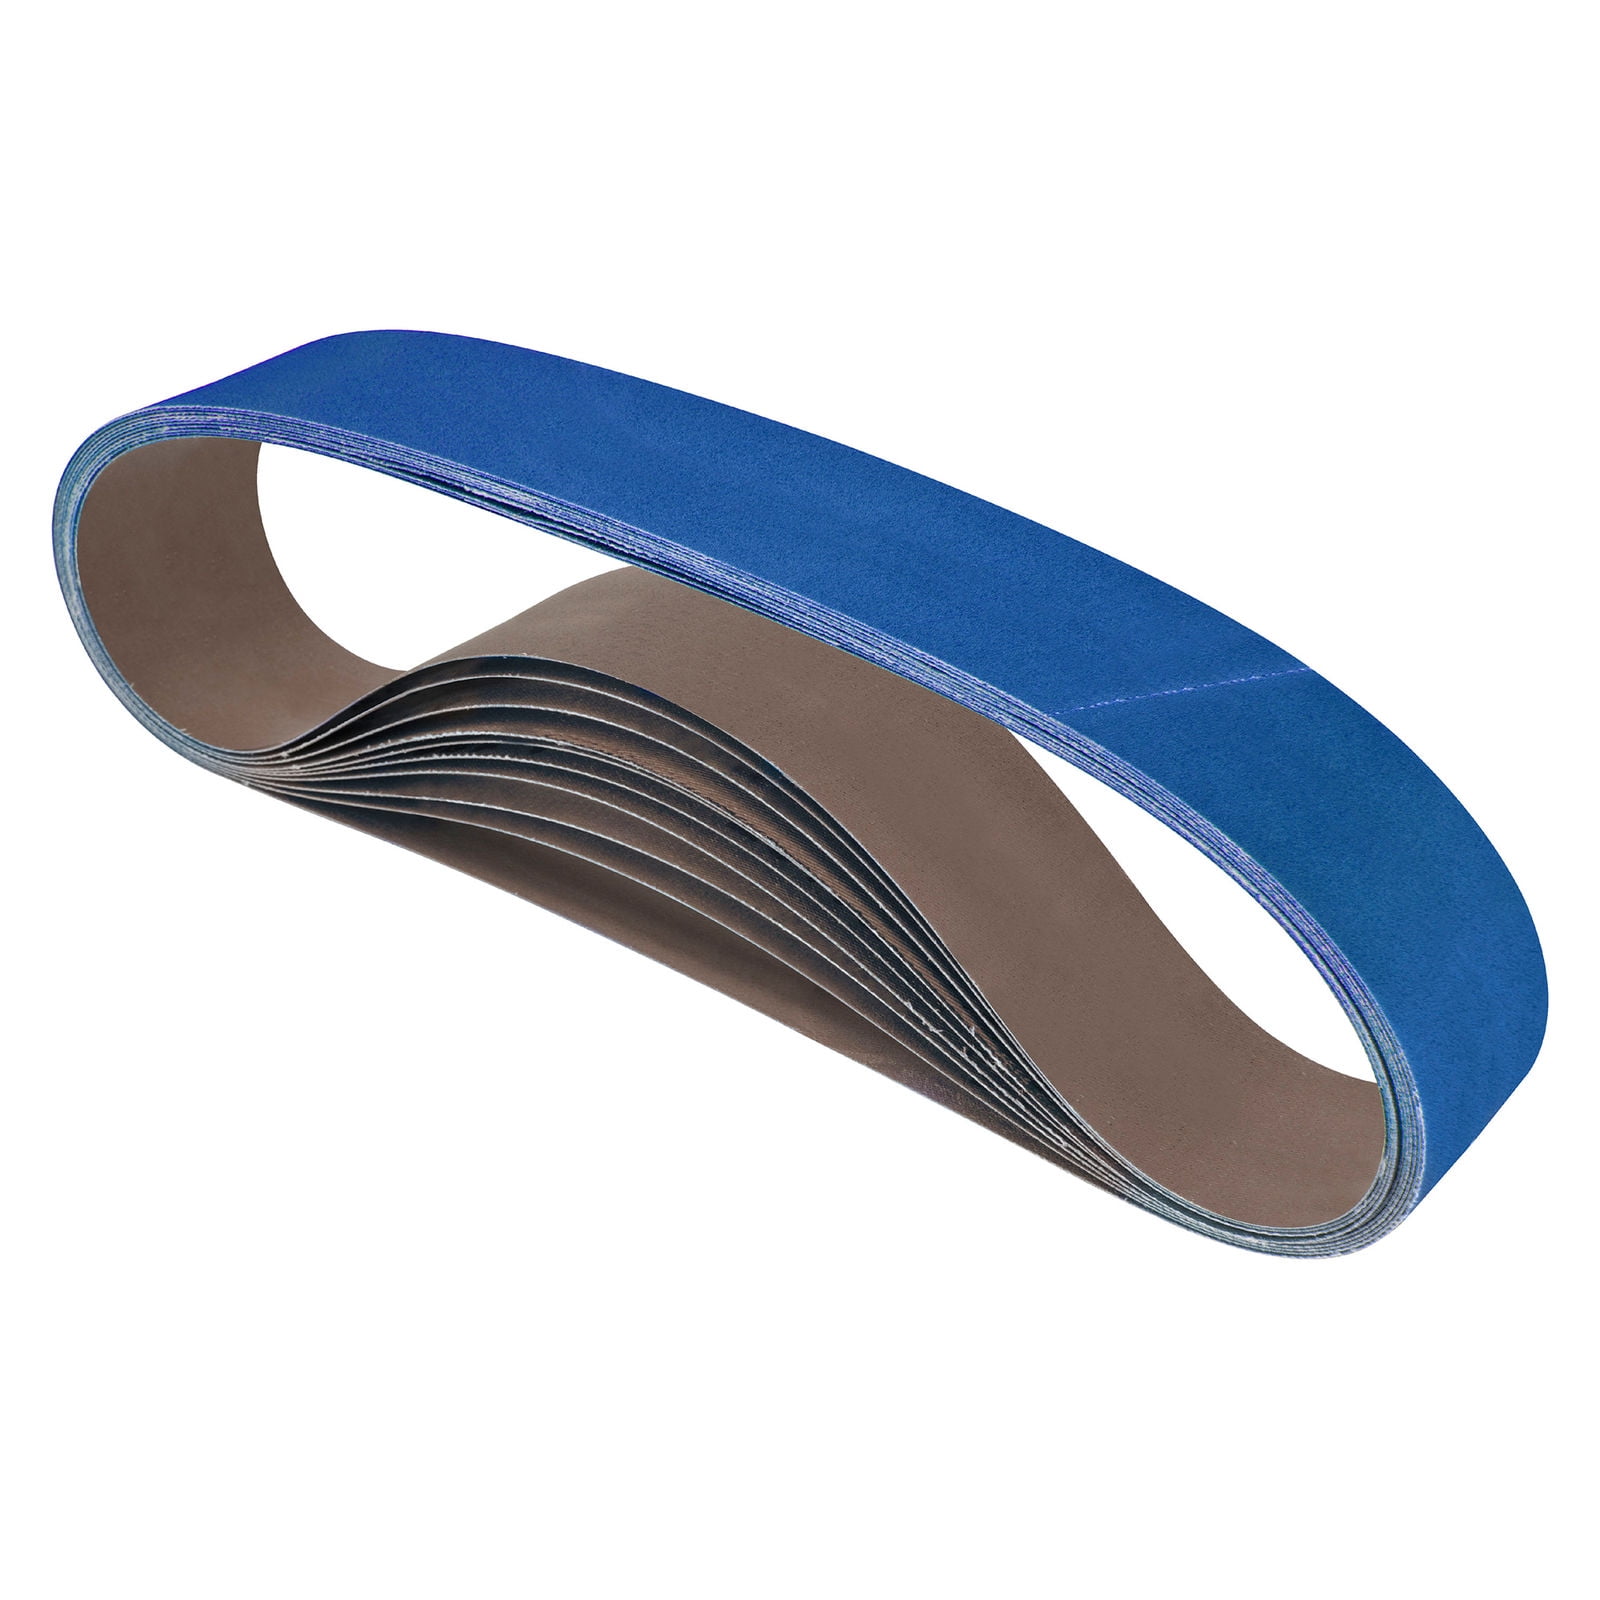 6 Pack 2 X 60 Inch 60 Grit Silicon Carbide Sanding Belts 